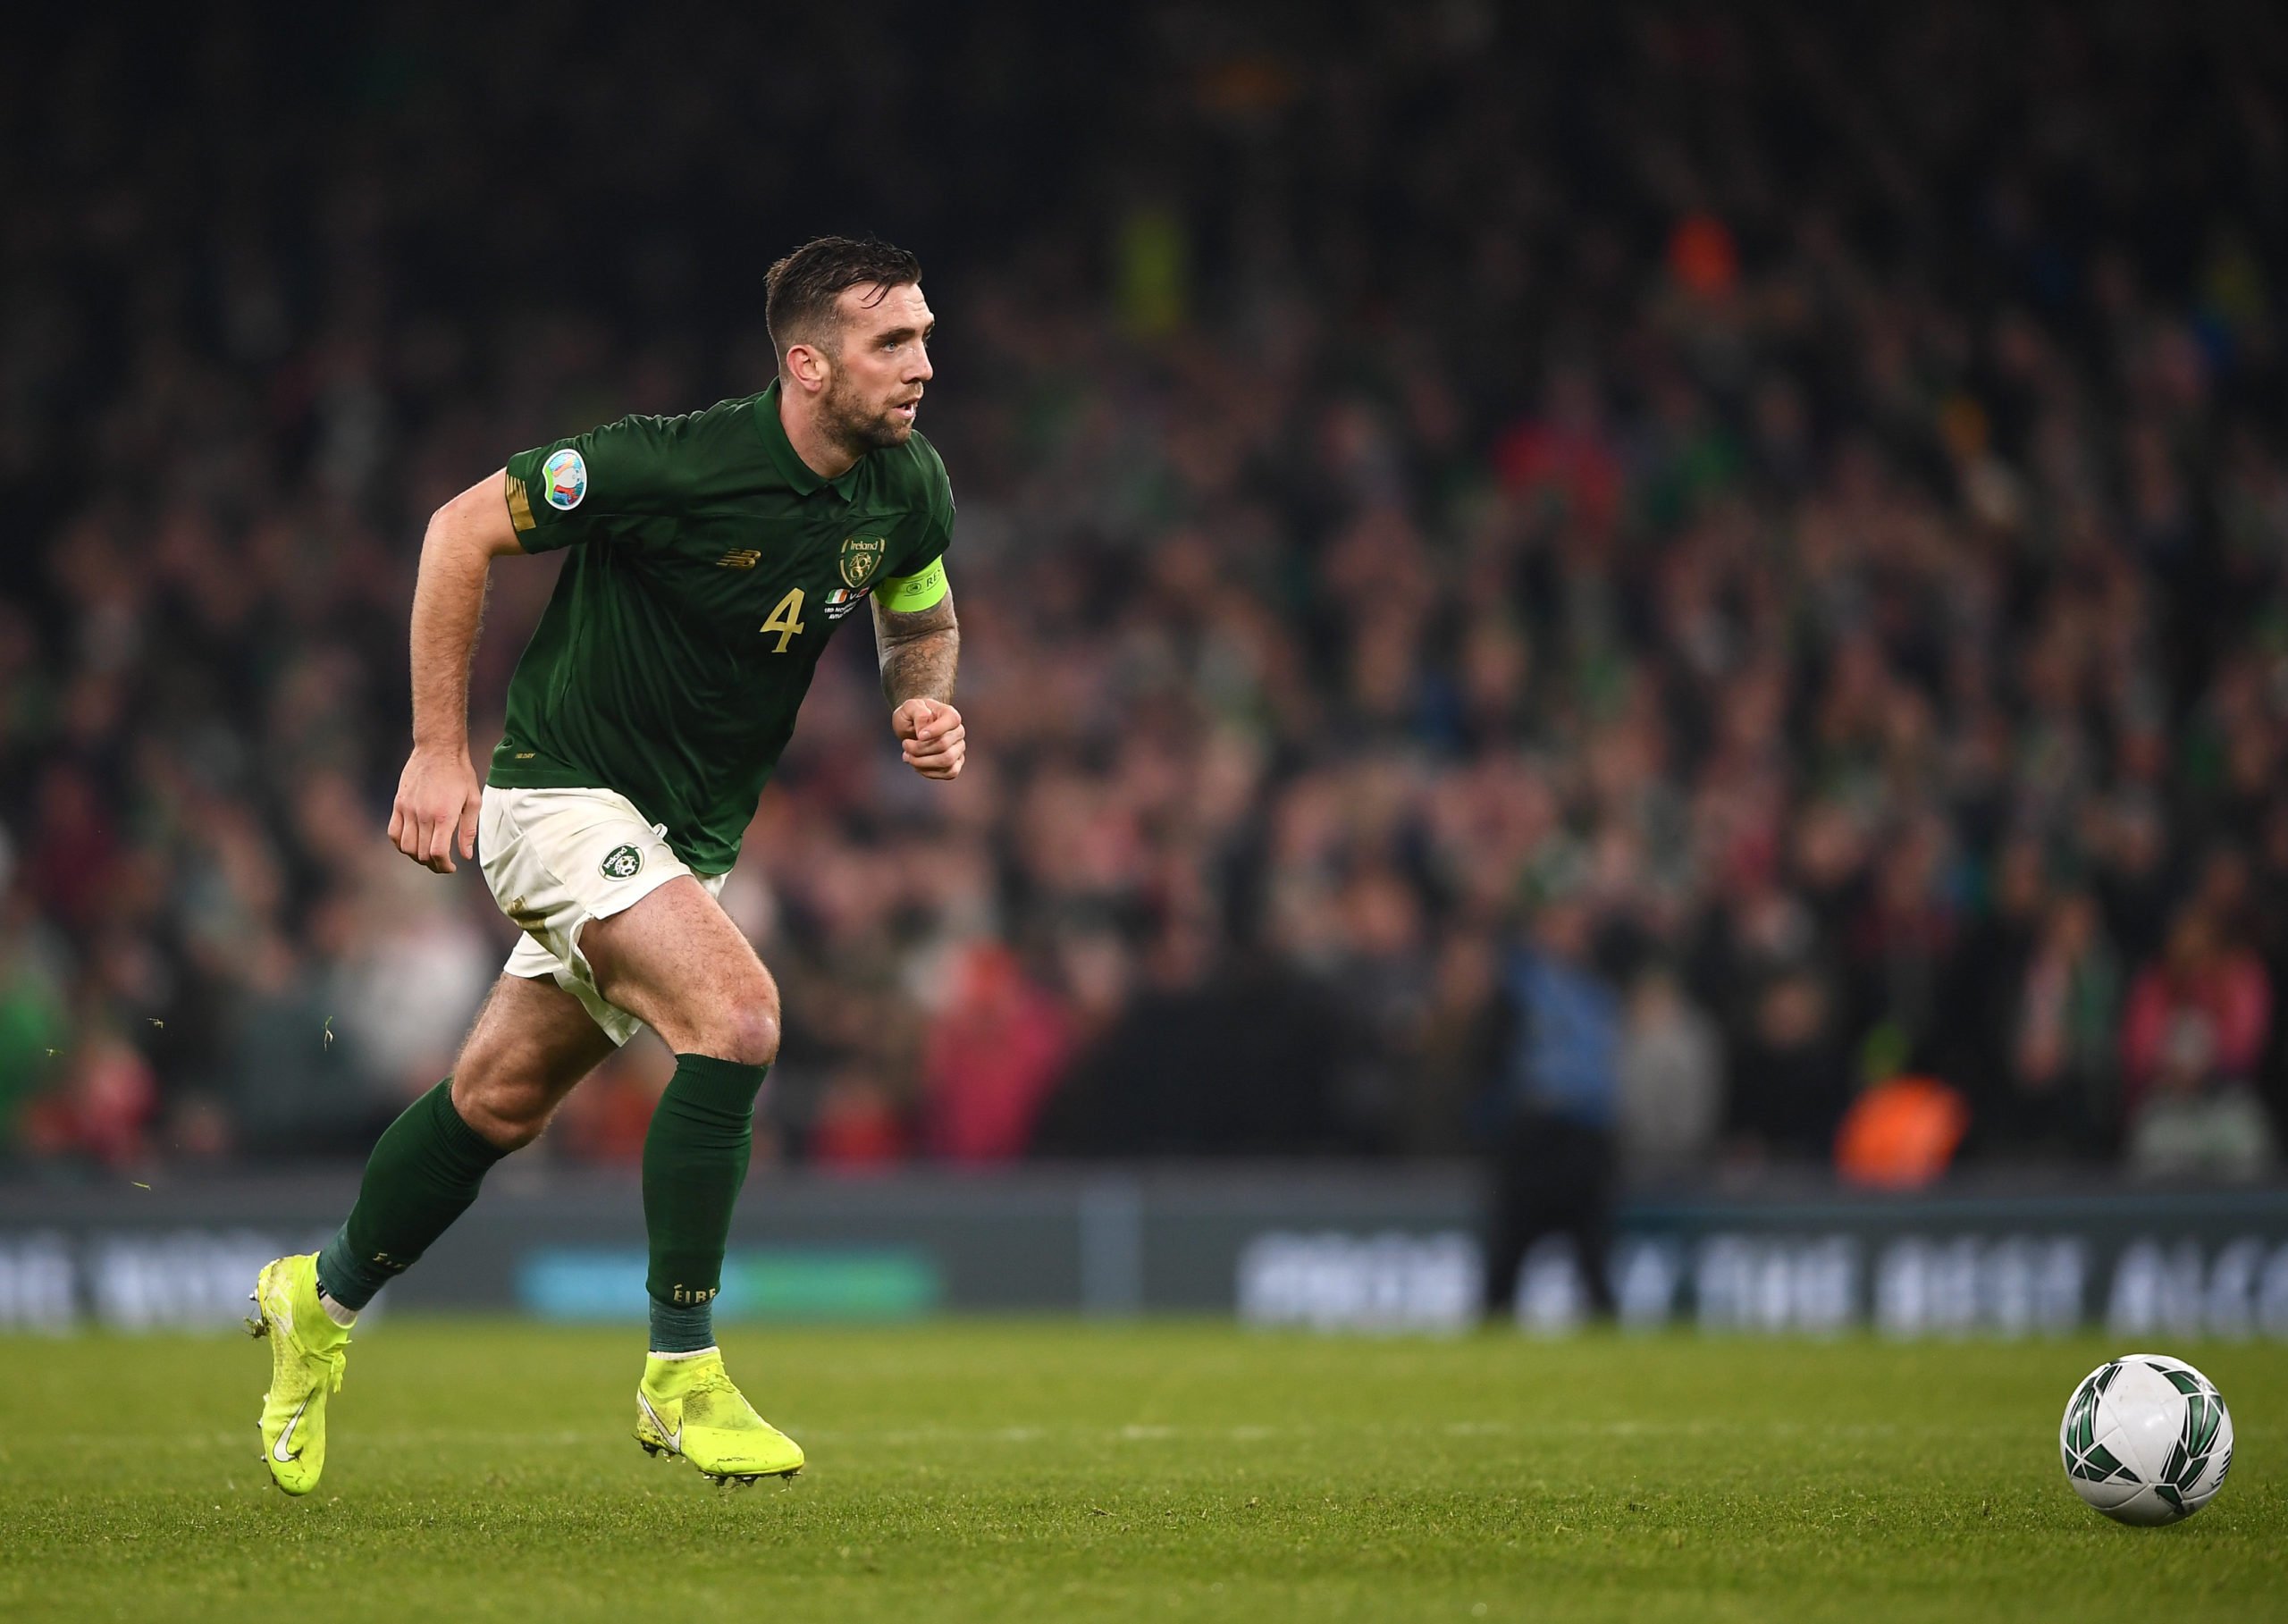 Shane Duffy to Celtic: Club quoted £2m for season-long loan after Lennon talks